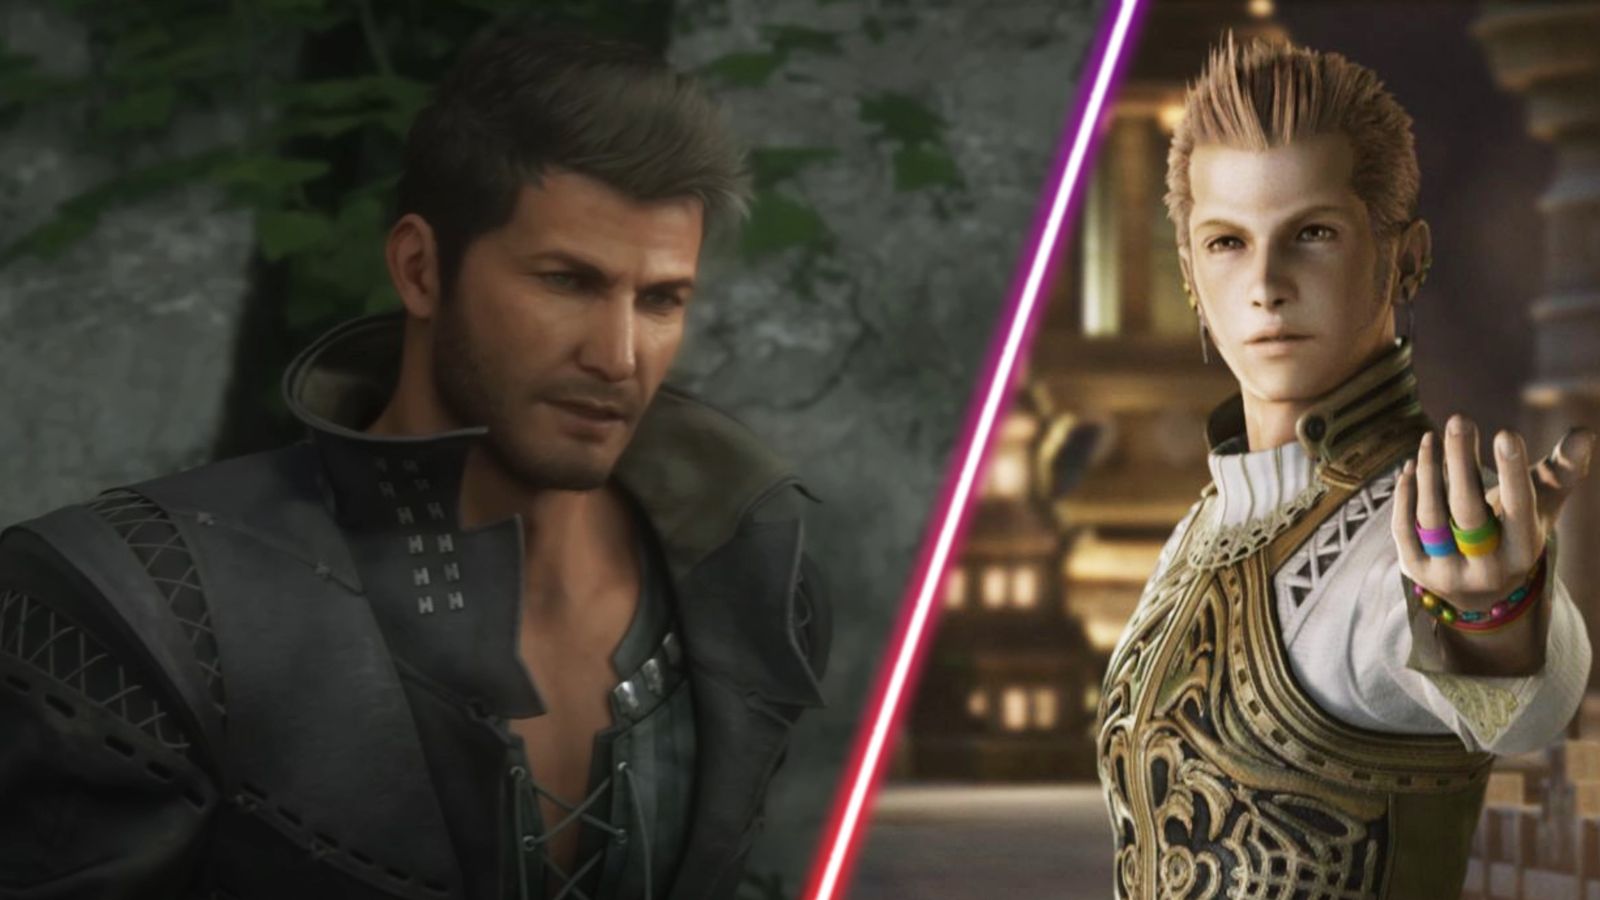 Final Fantasy characters Cid and Balthier.